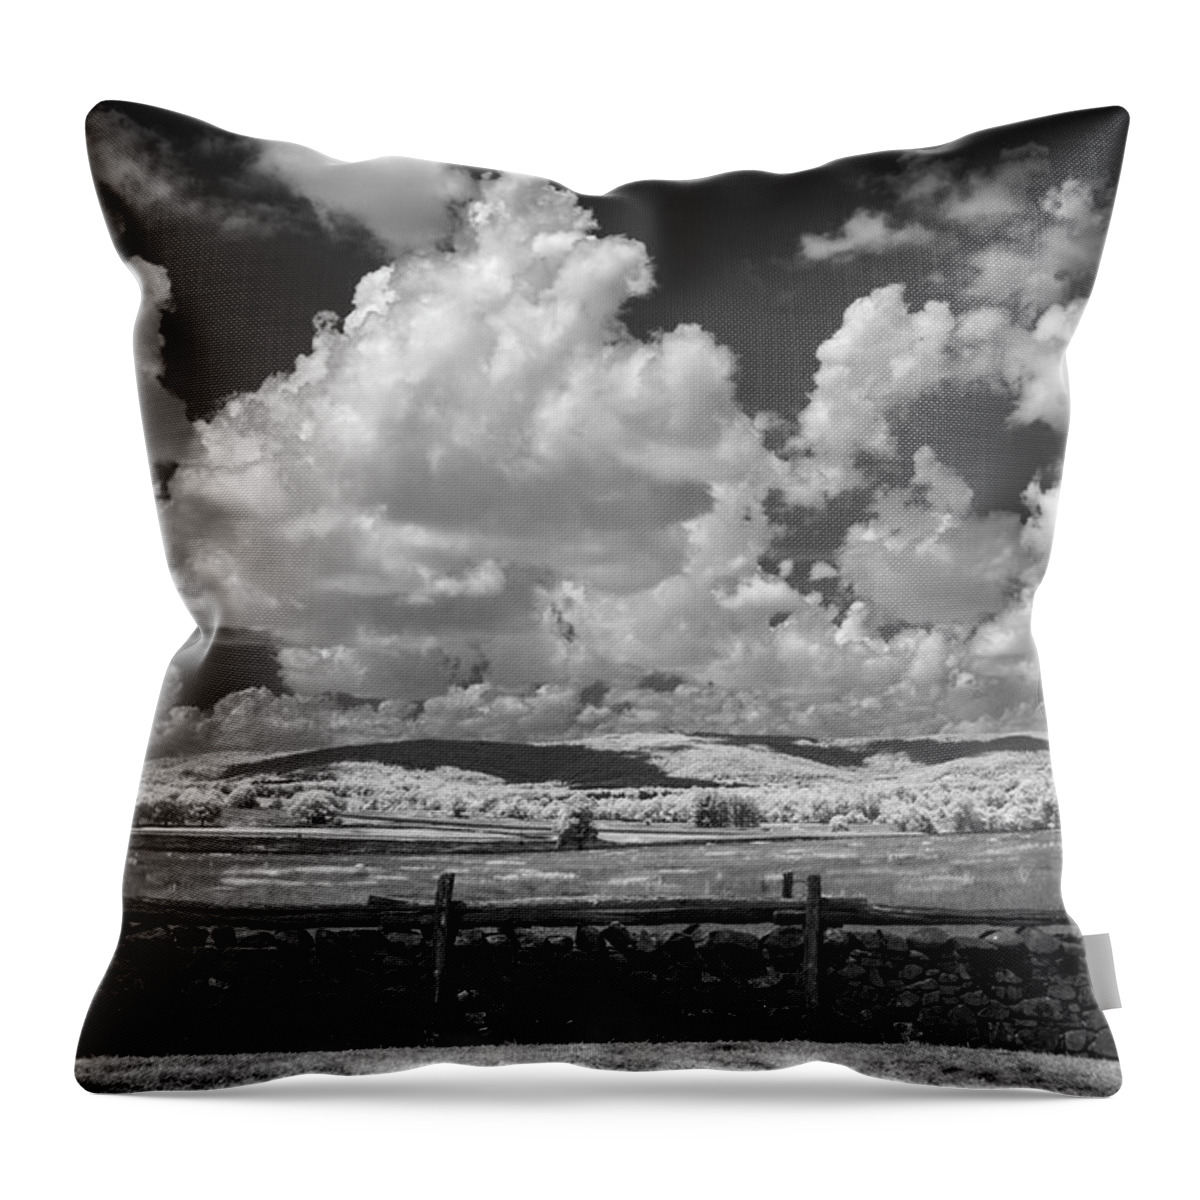 Clouds Throw Pillow featuring the photograph Rural Solitude by Norman Reid